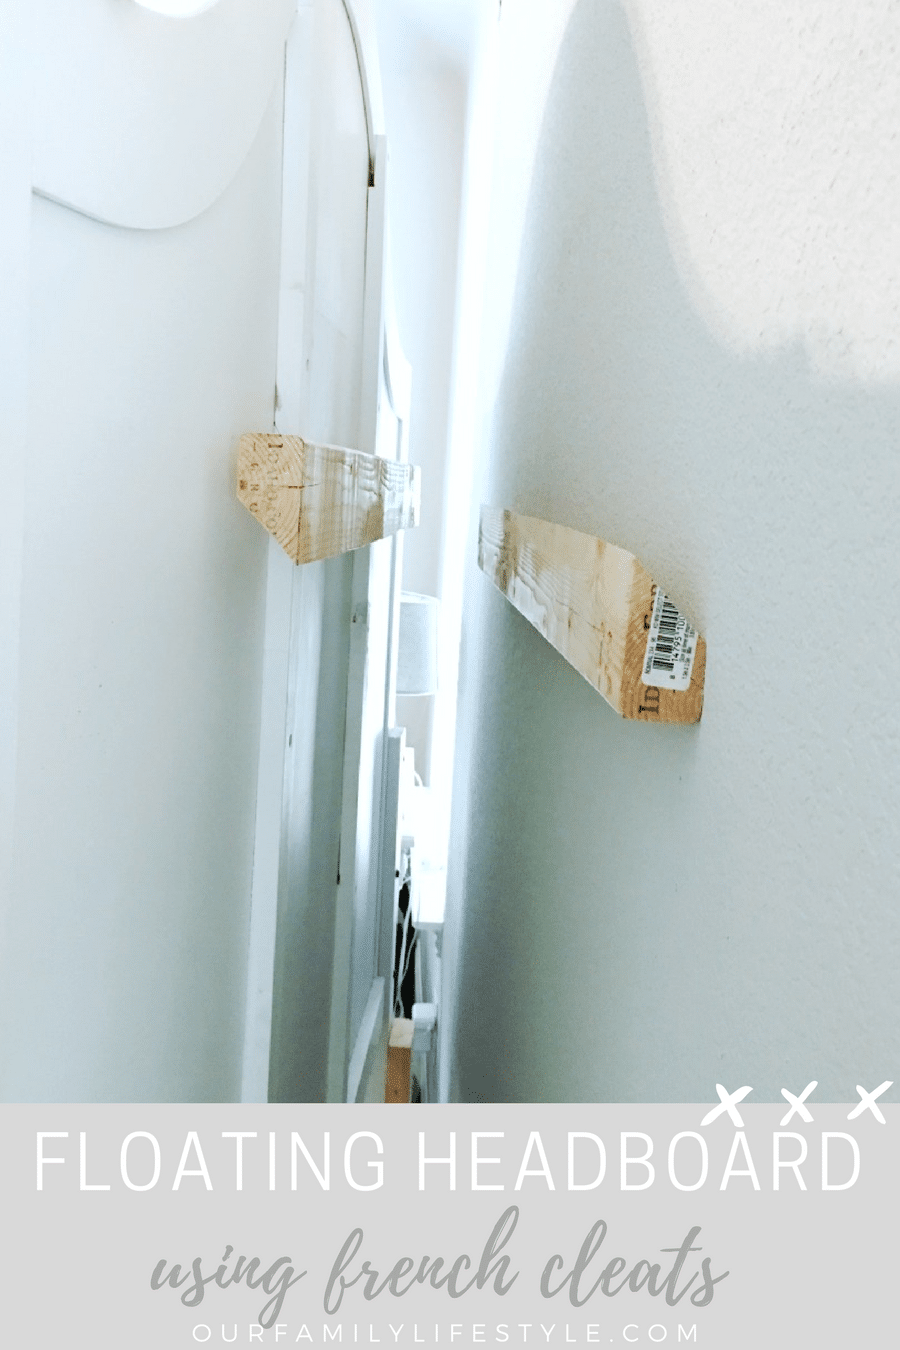 Headboard To The Wall Using French Cleats, How To Secure Headboard Wall